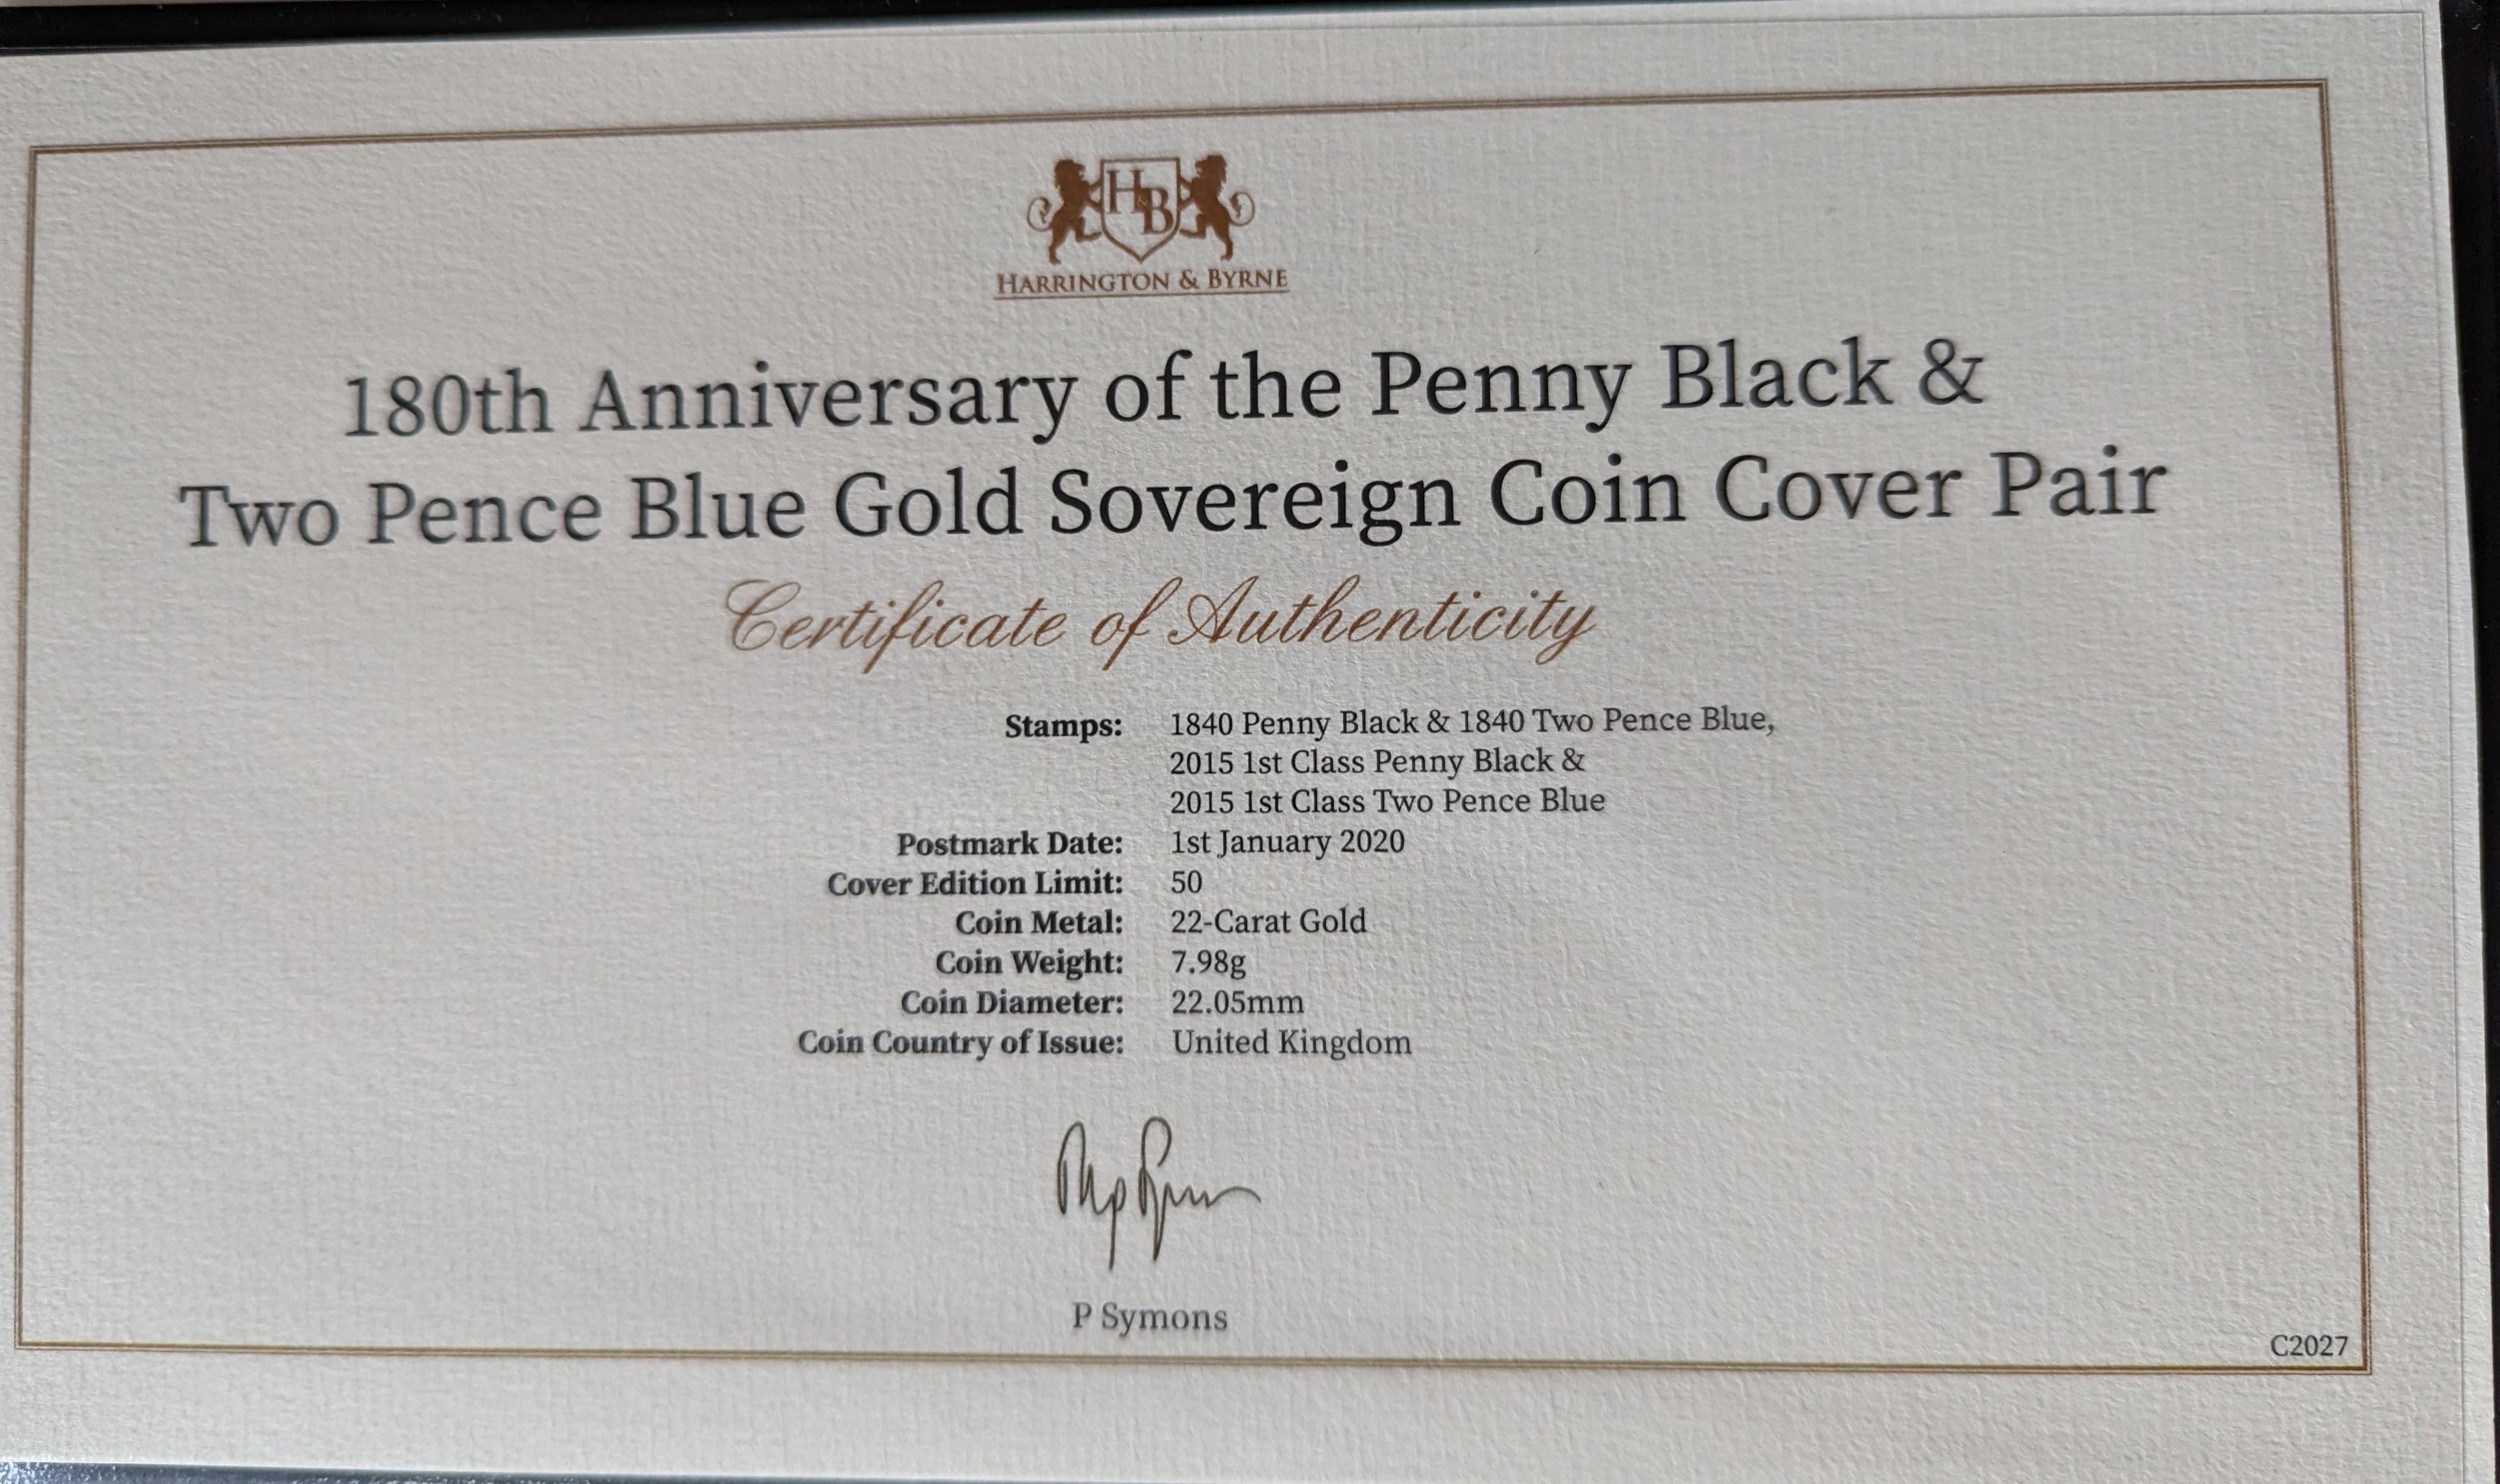 A Harrington & Byrne 180 Anniversary of the Penny Black & Two Pence Blue, Gold Sovereign Coin Pair - Image 2 of 3